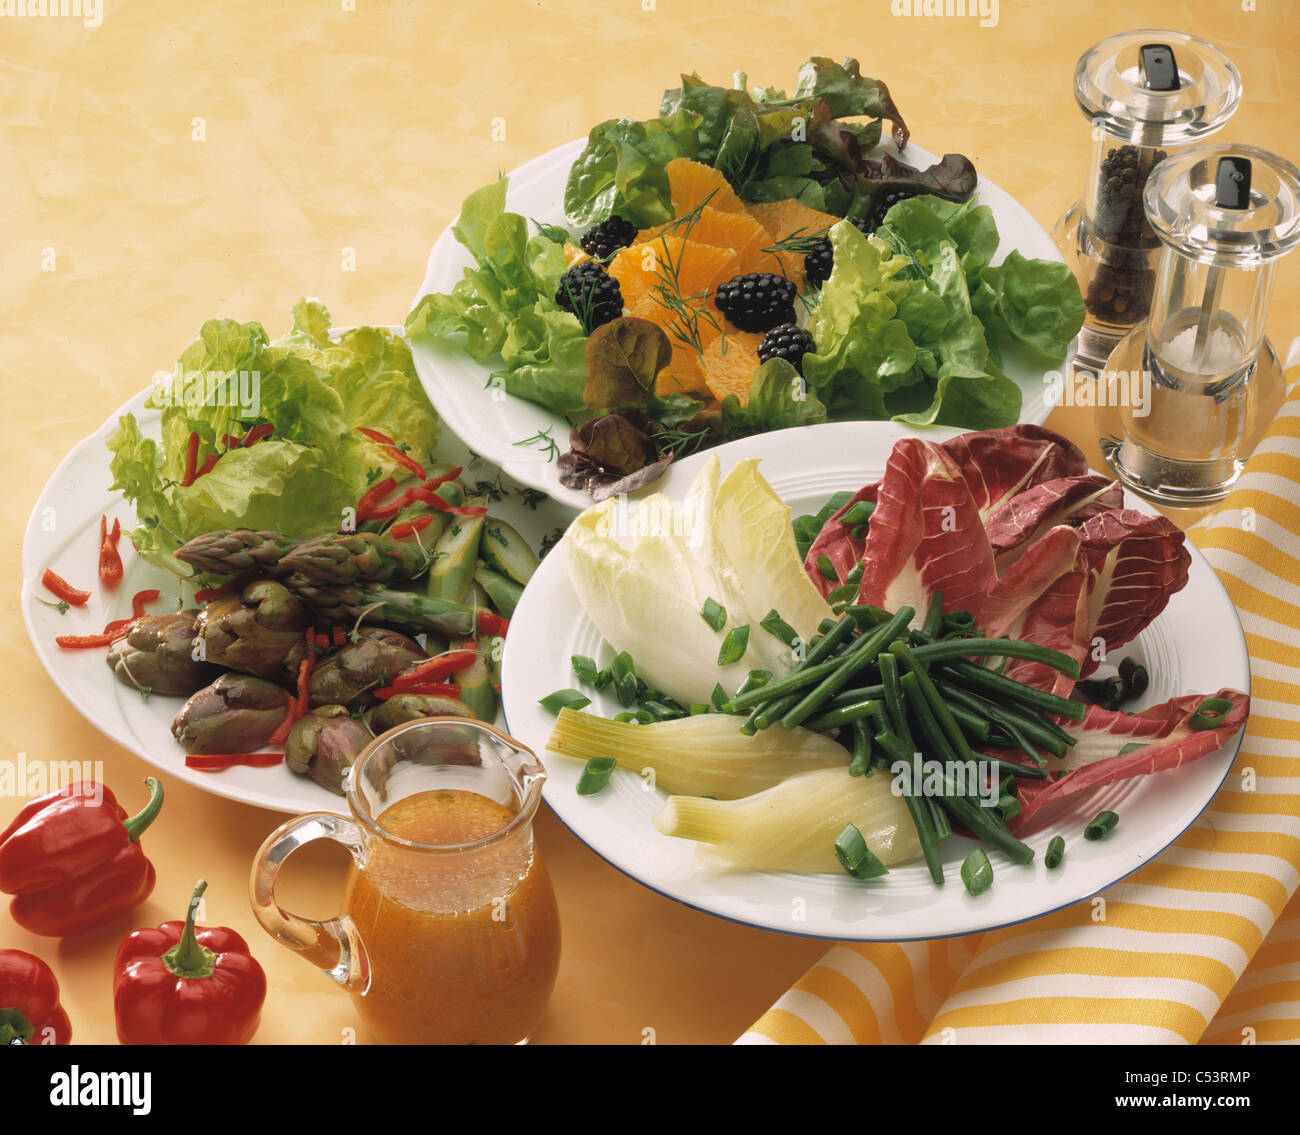 Tableau: Salads with blackberries and oranges / with asparagus and artichoke hearts / with green beans Stock Photo